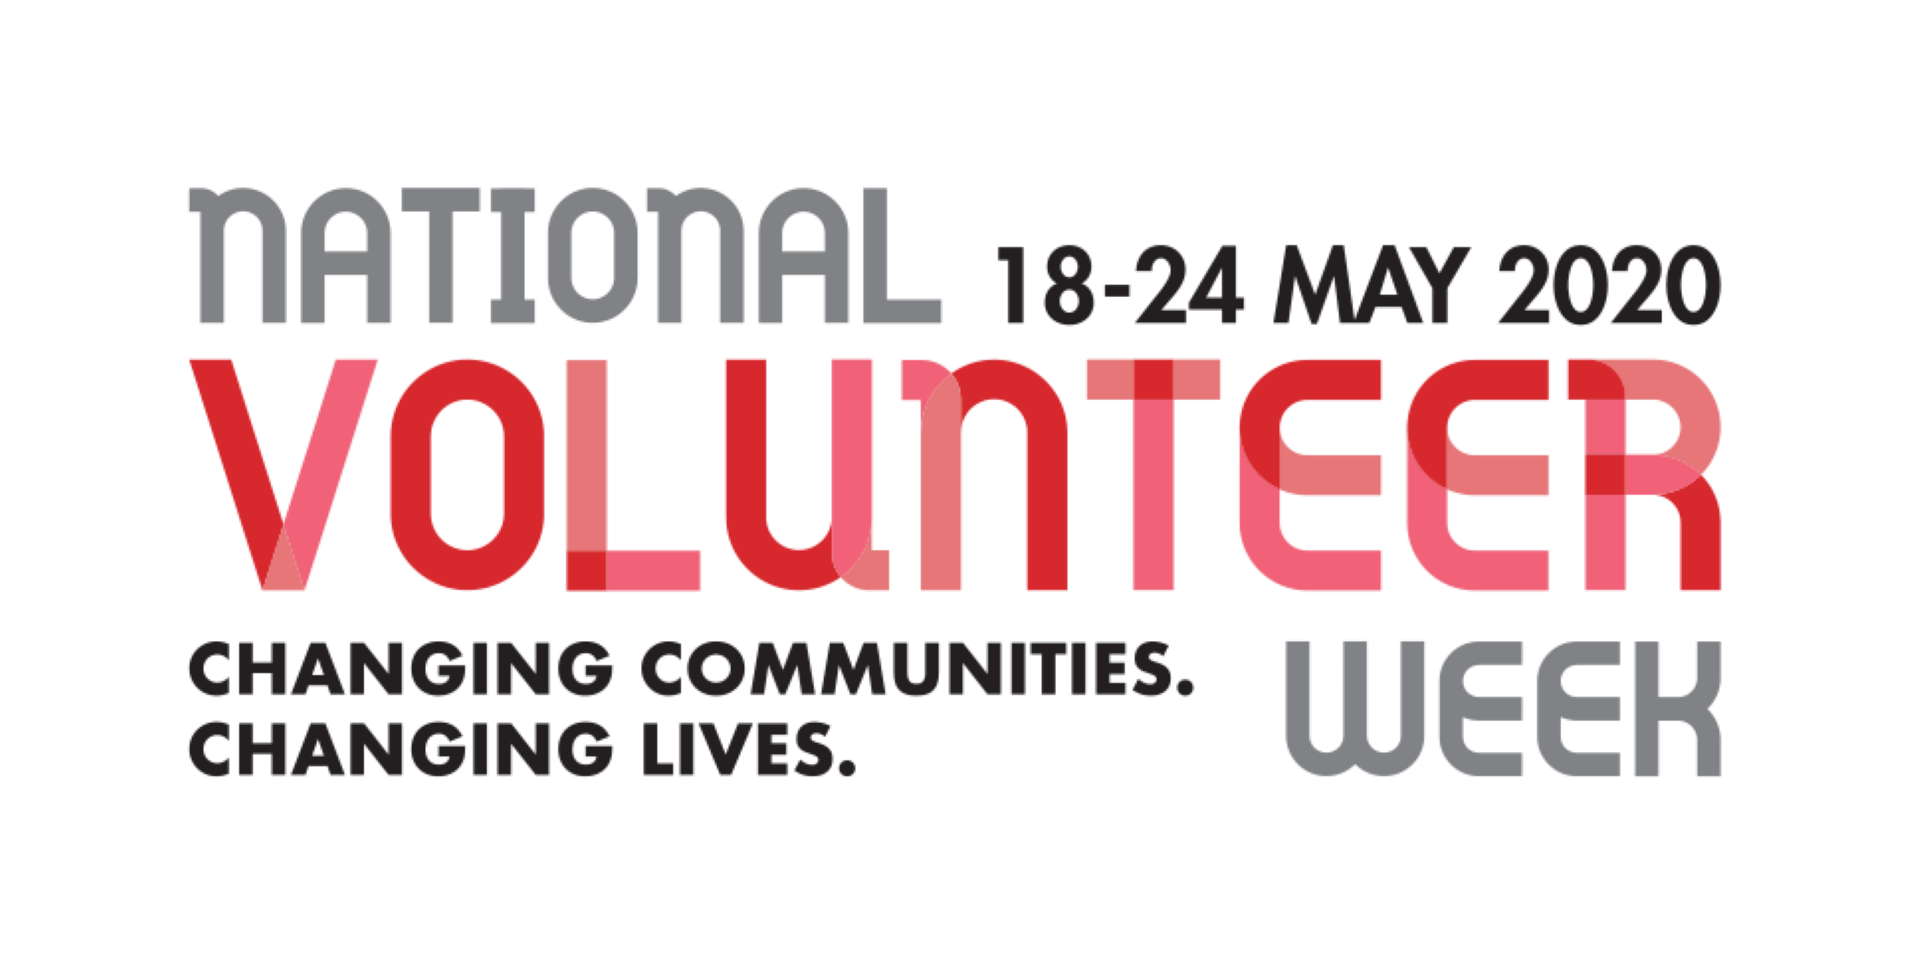 The text reads 'National volunteer week 18-24 May. Changing communities. Changing lives'